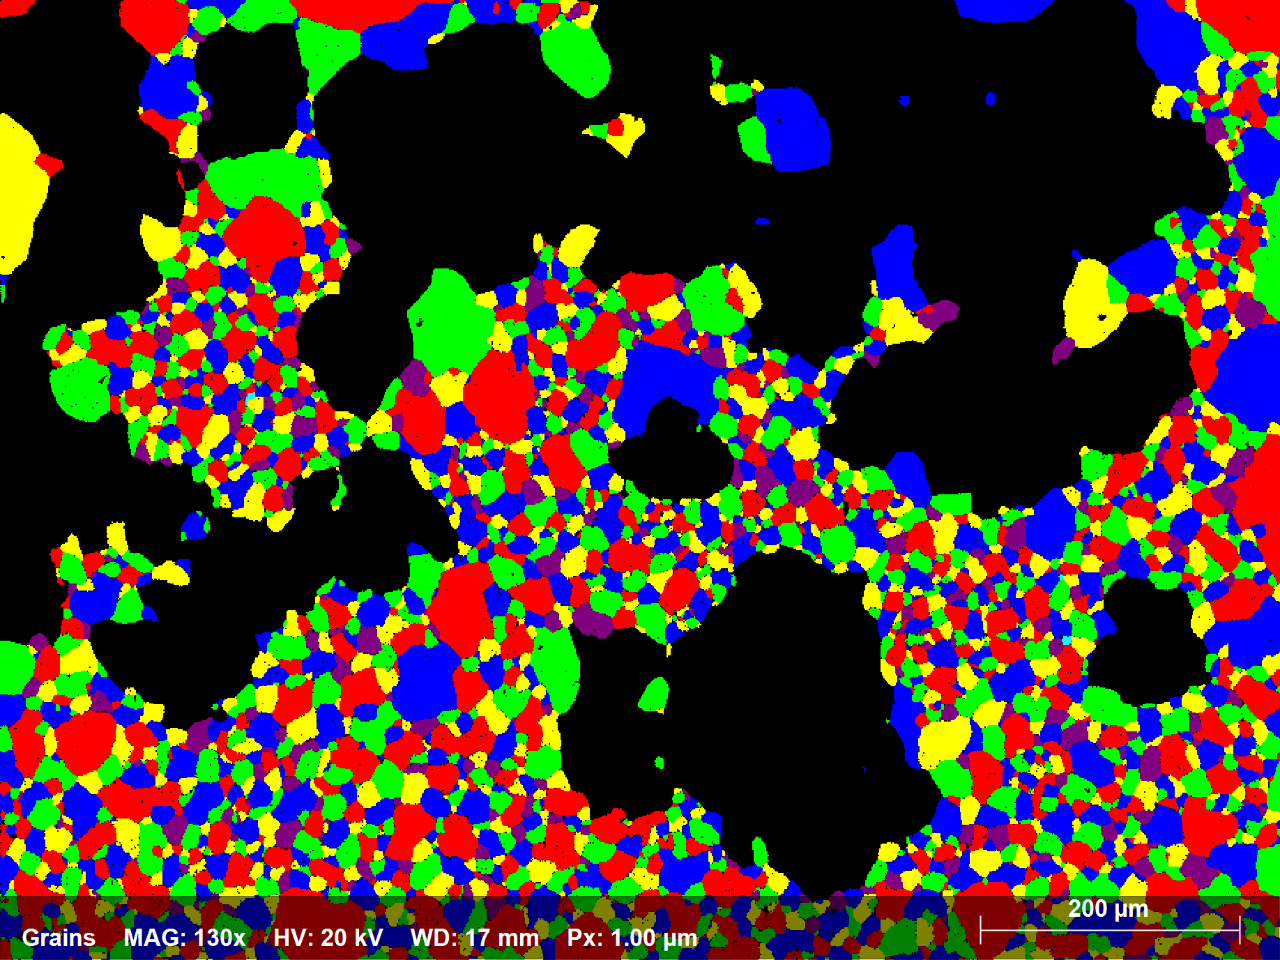 Fig. 1.4: Subset of the Ni-alloy EBSD map showing in random colors all grains with an equivalent diameter smaller than 70microns; there are 2250 grains representing ~58% of the map area